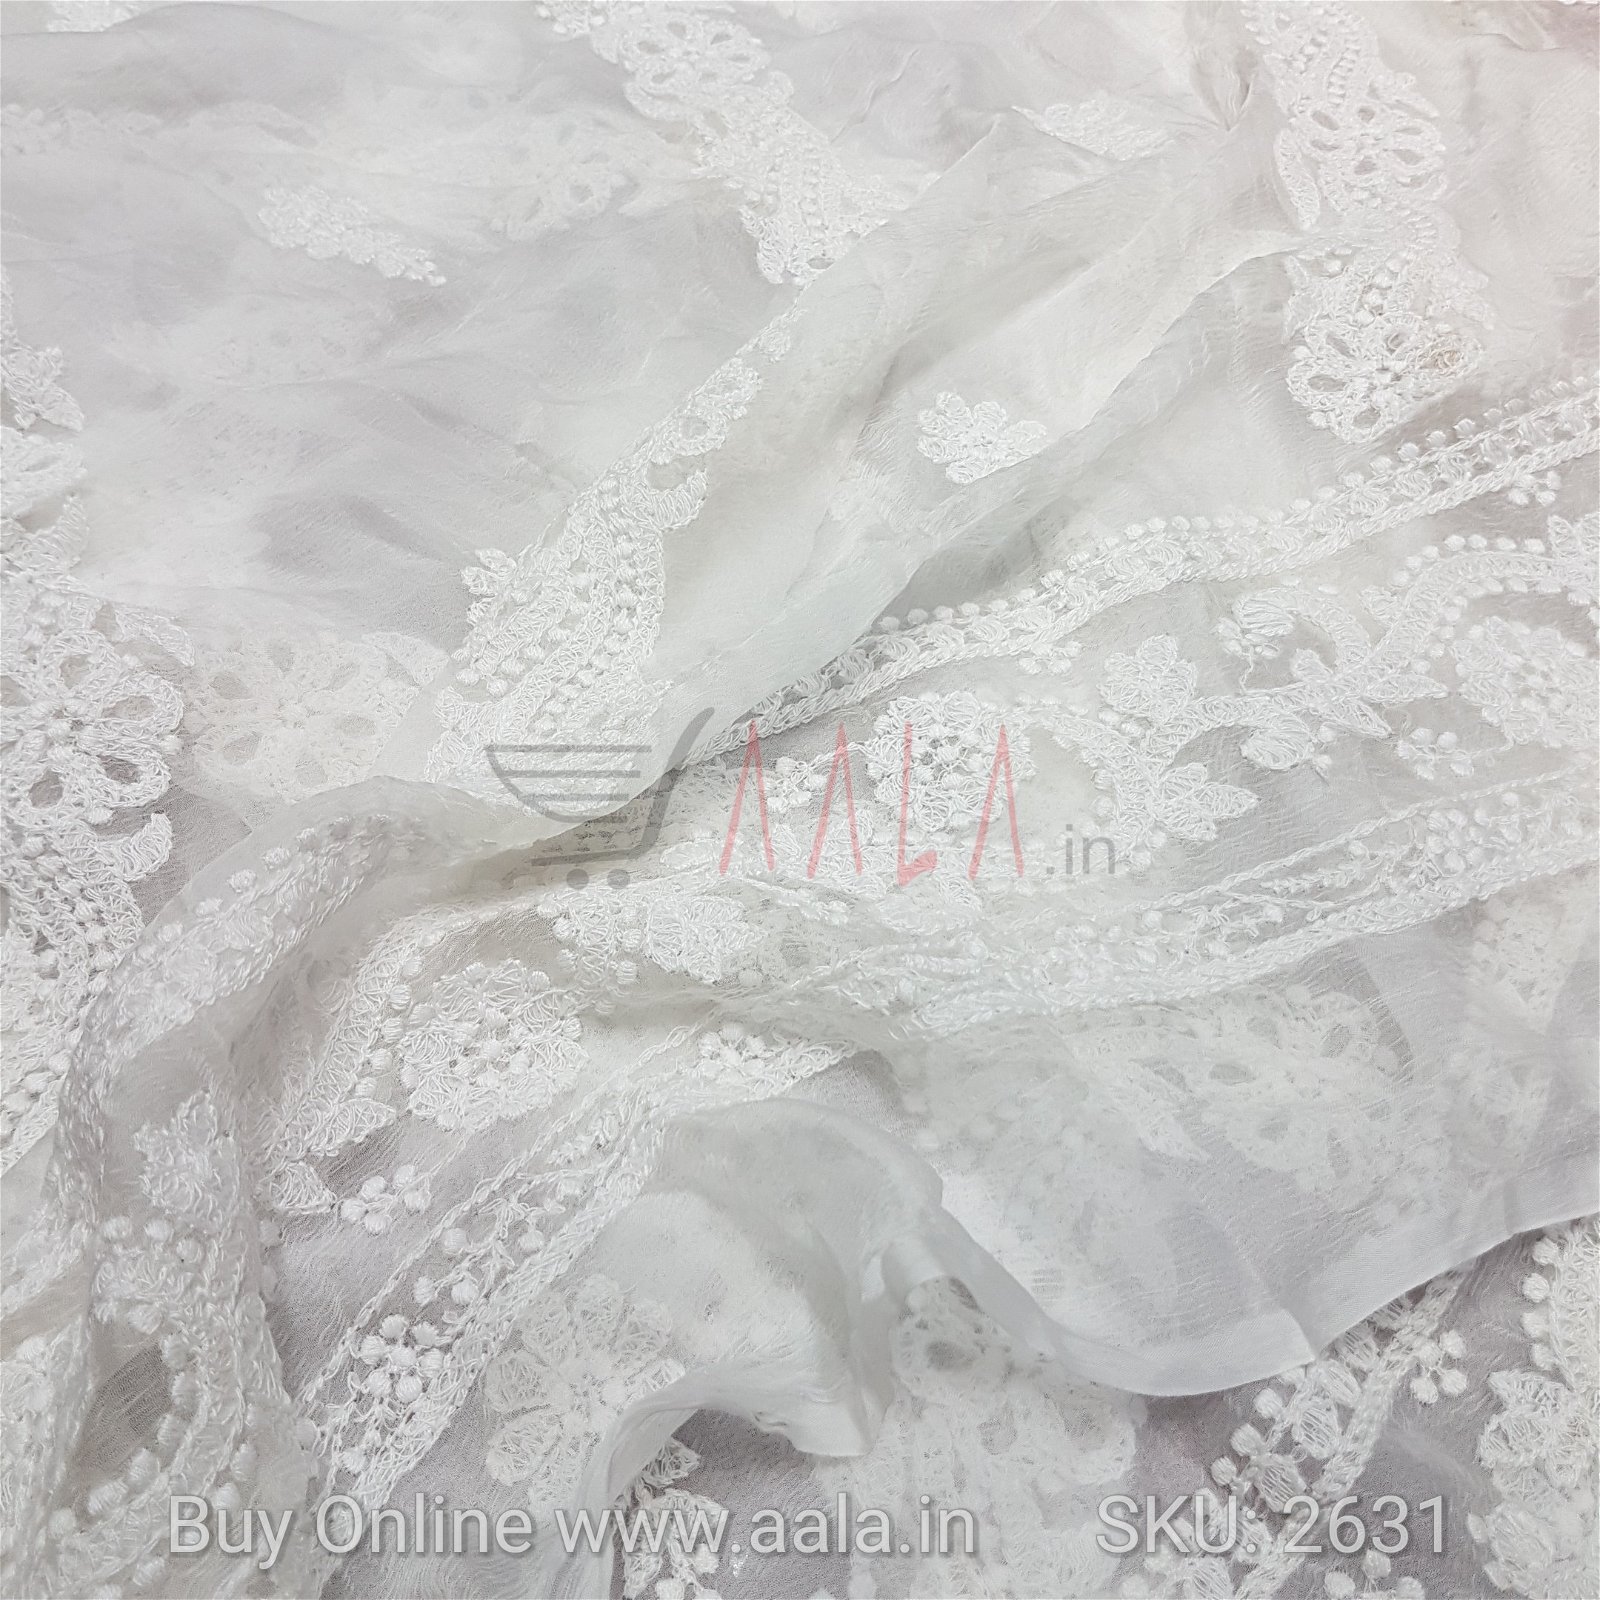 Embroidered Chiffon Viscose 42 Inches Dyeable 2.25 Metres #2631